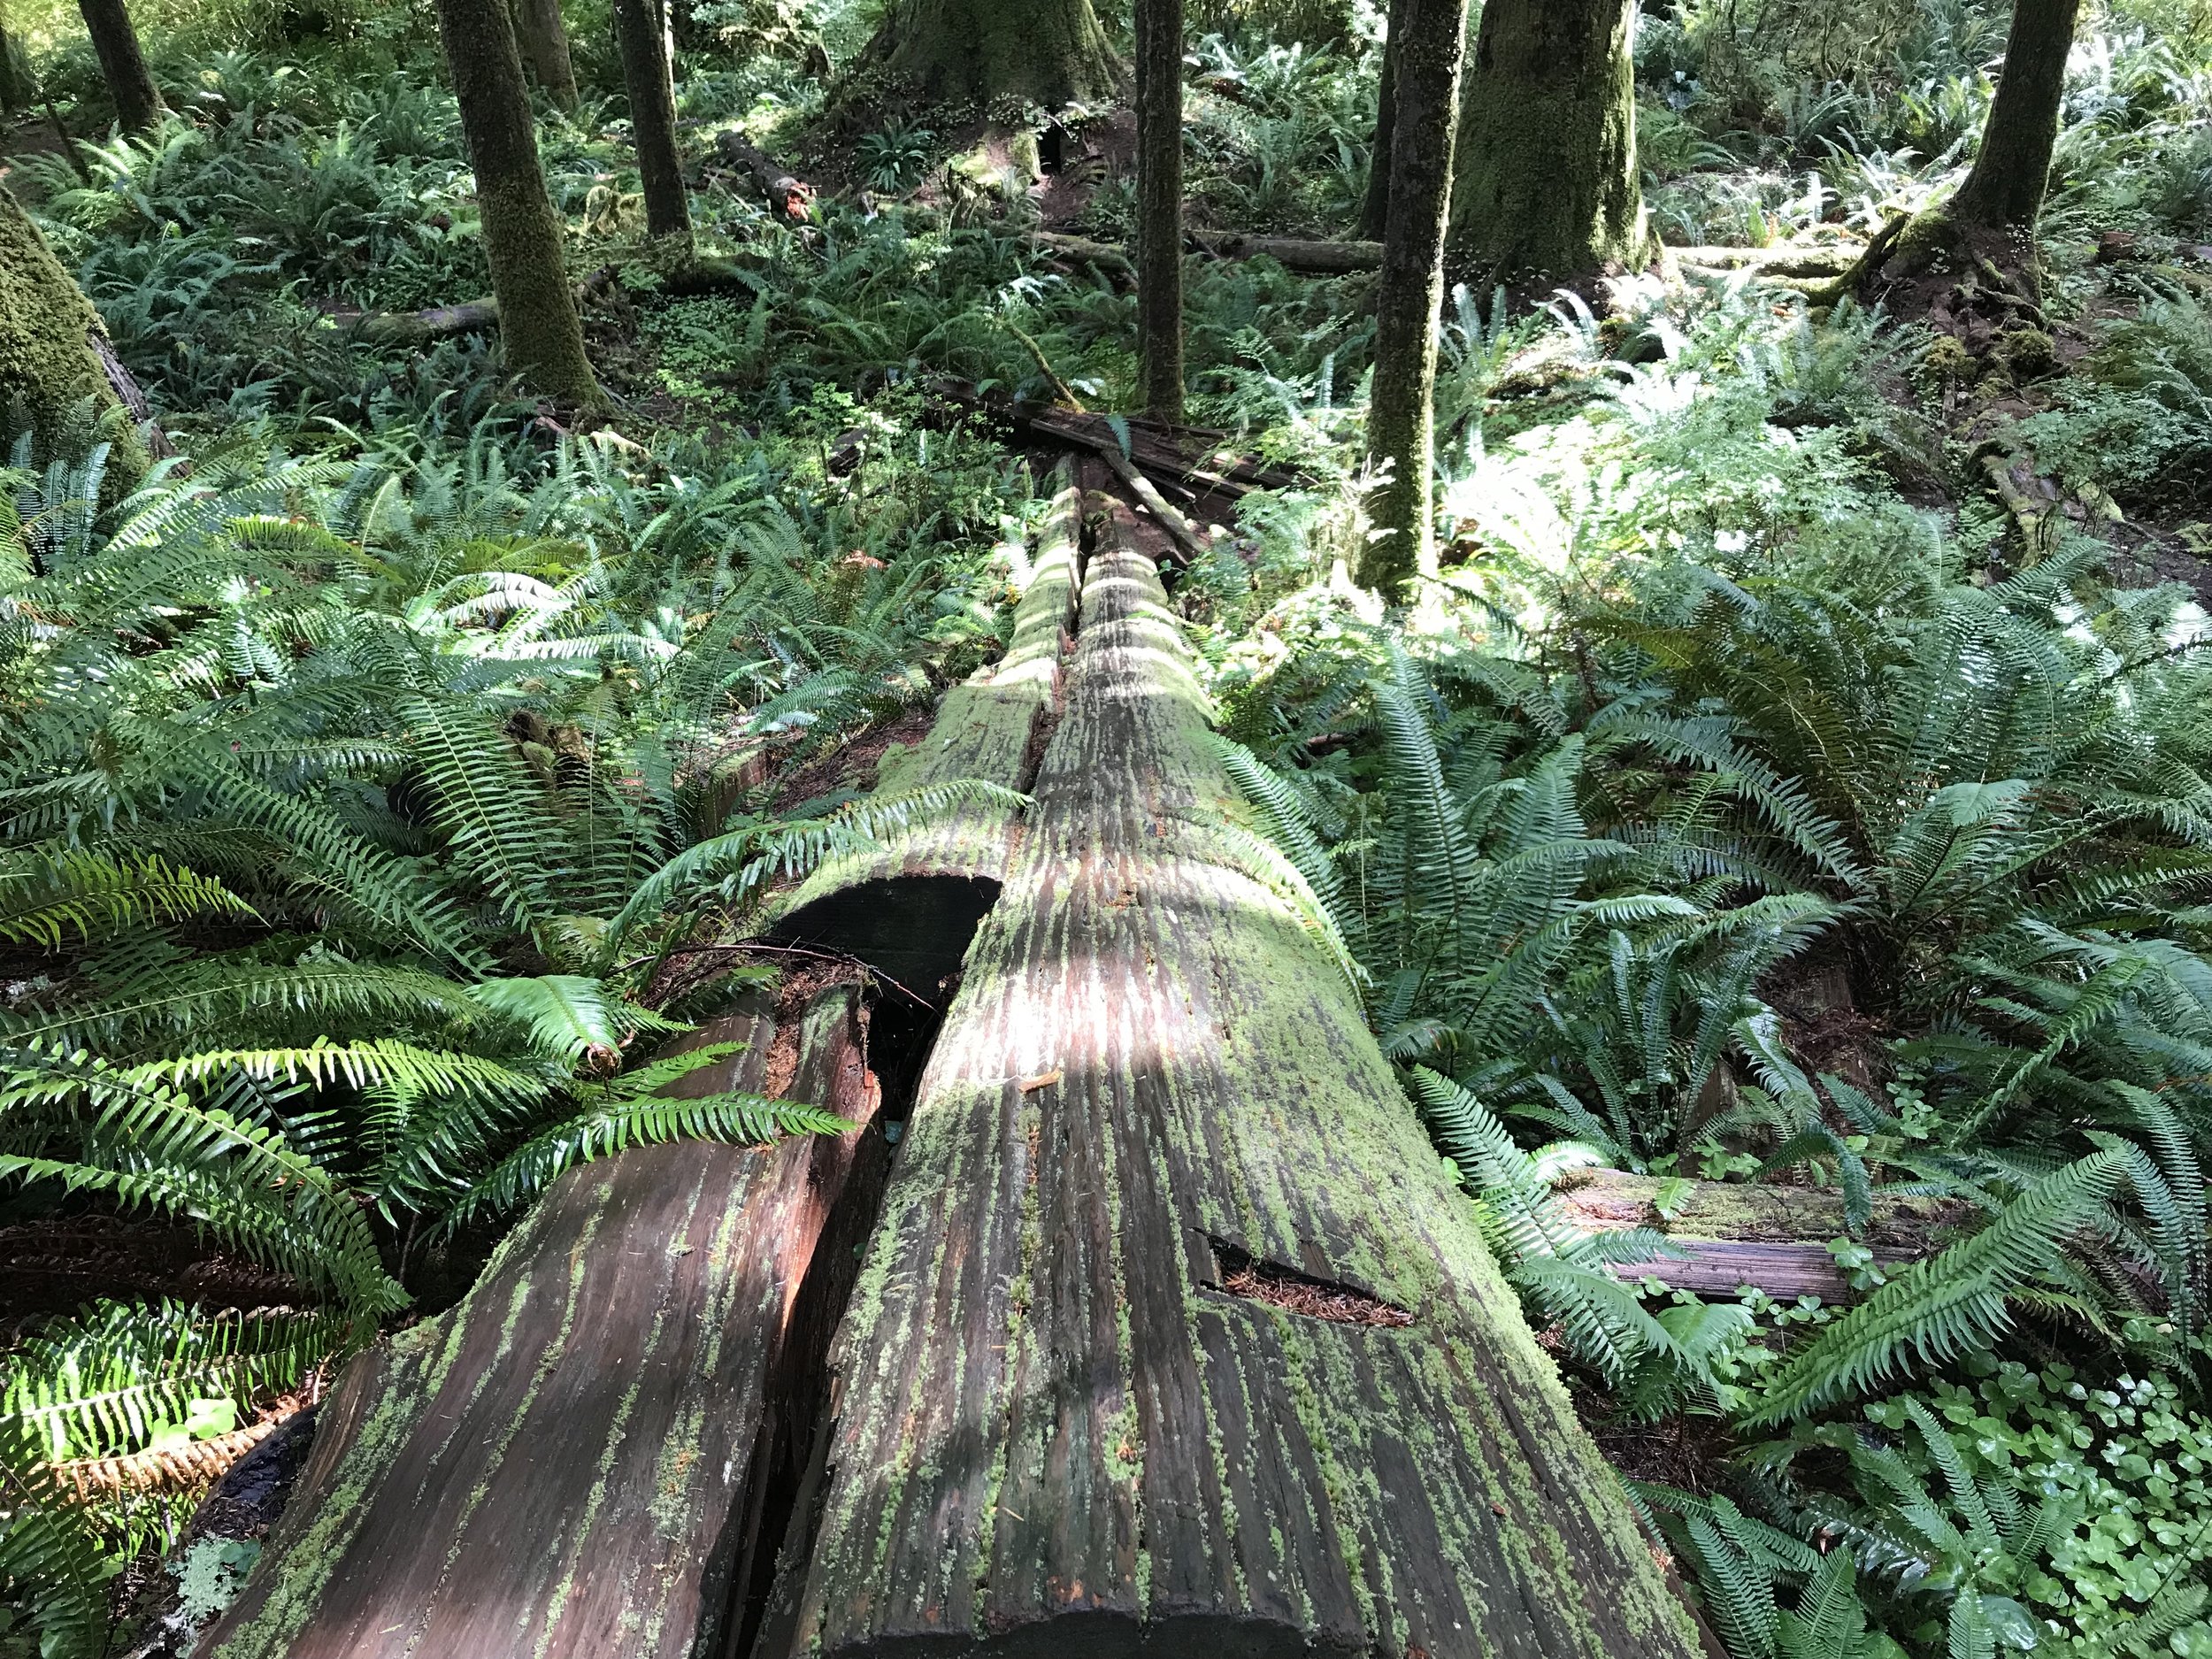  The temperate rainforest teems with energy and life. 